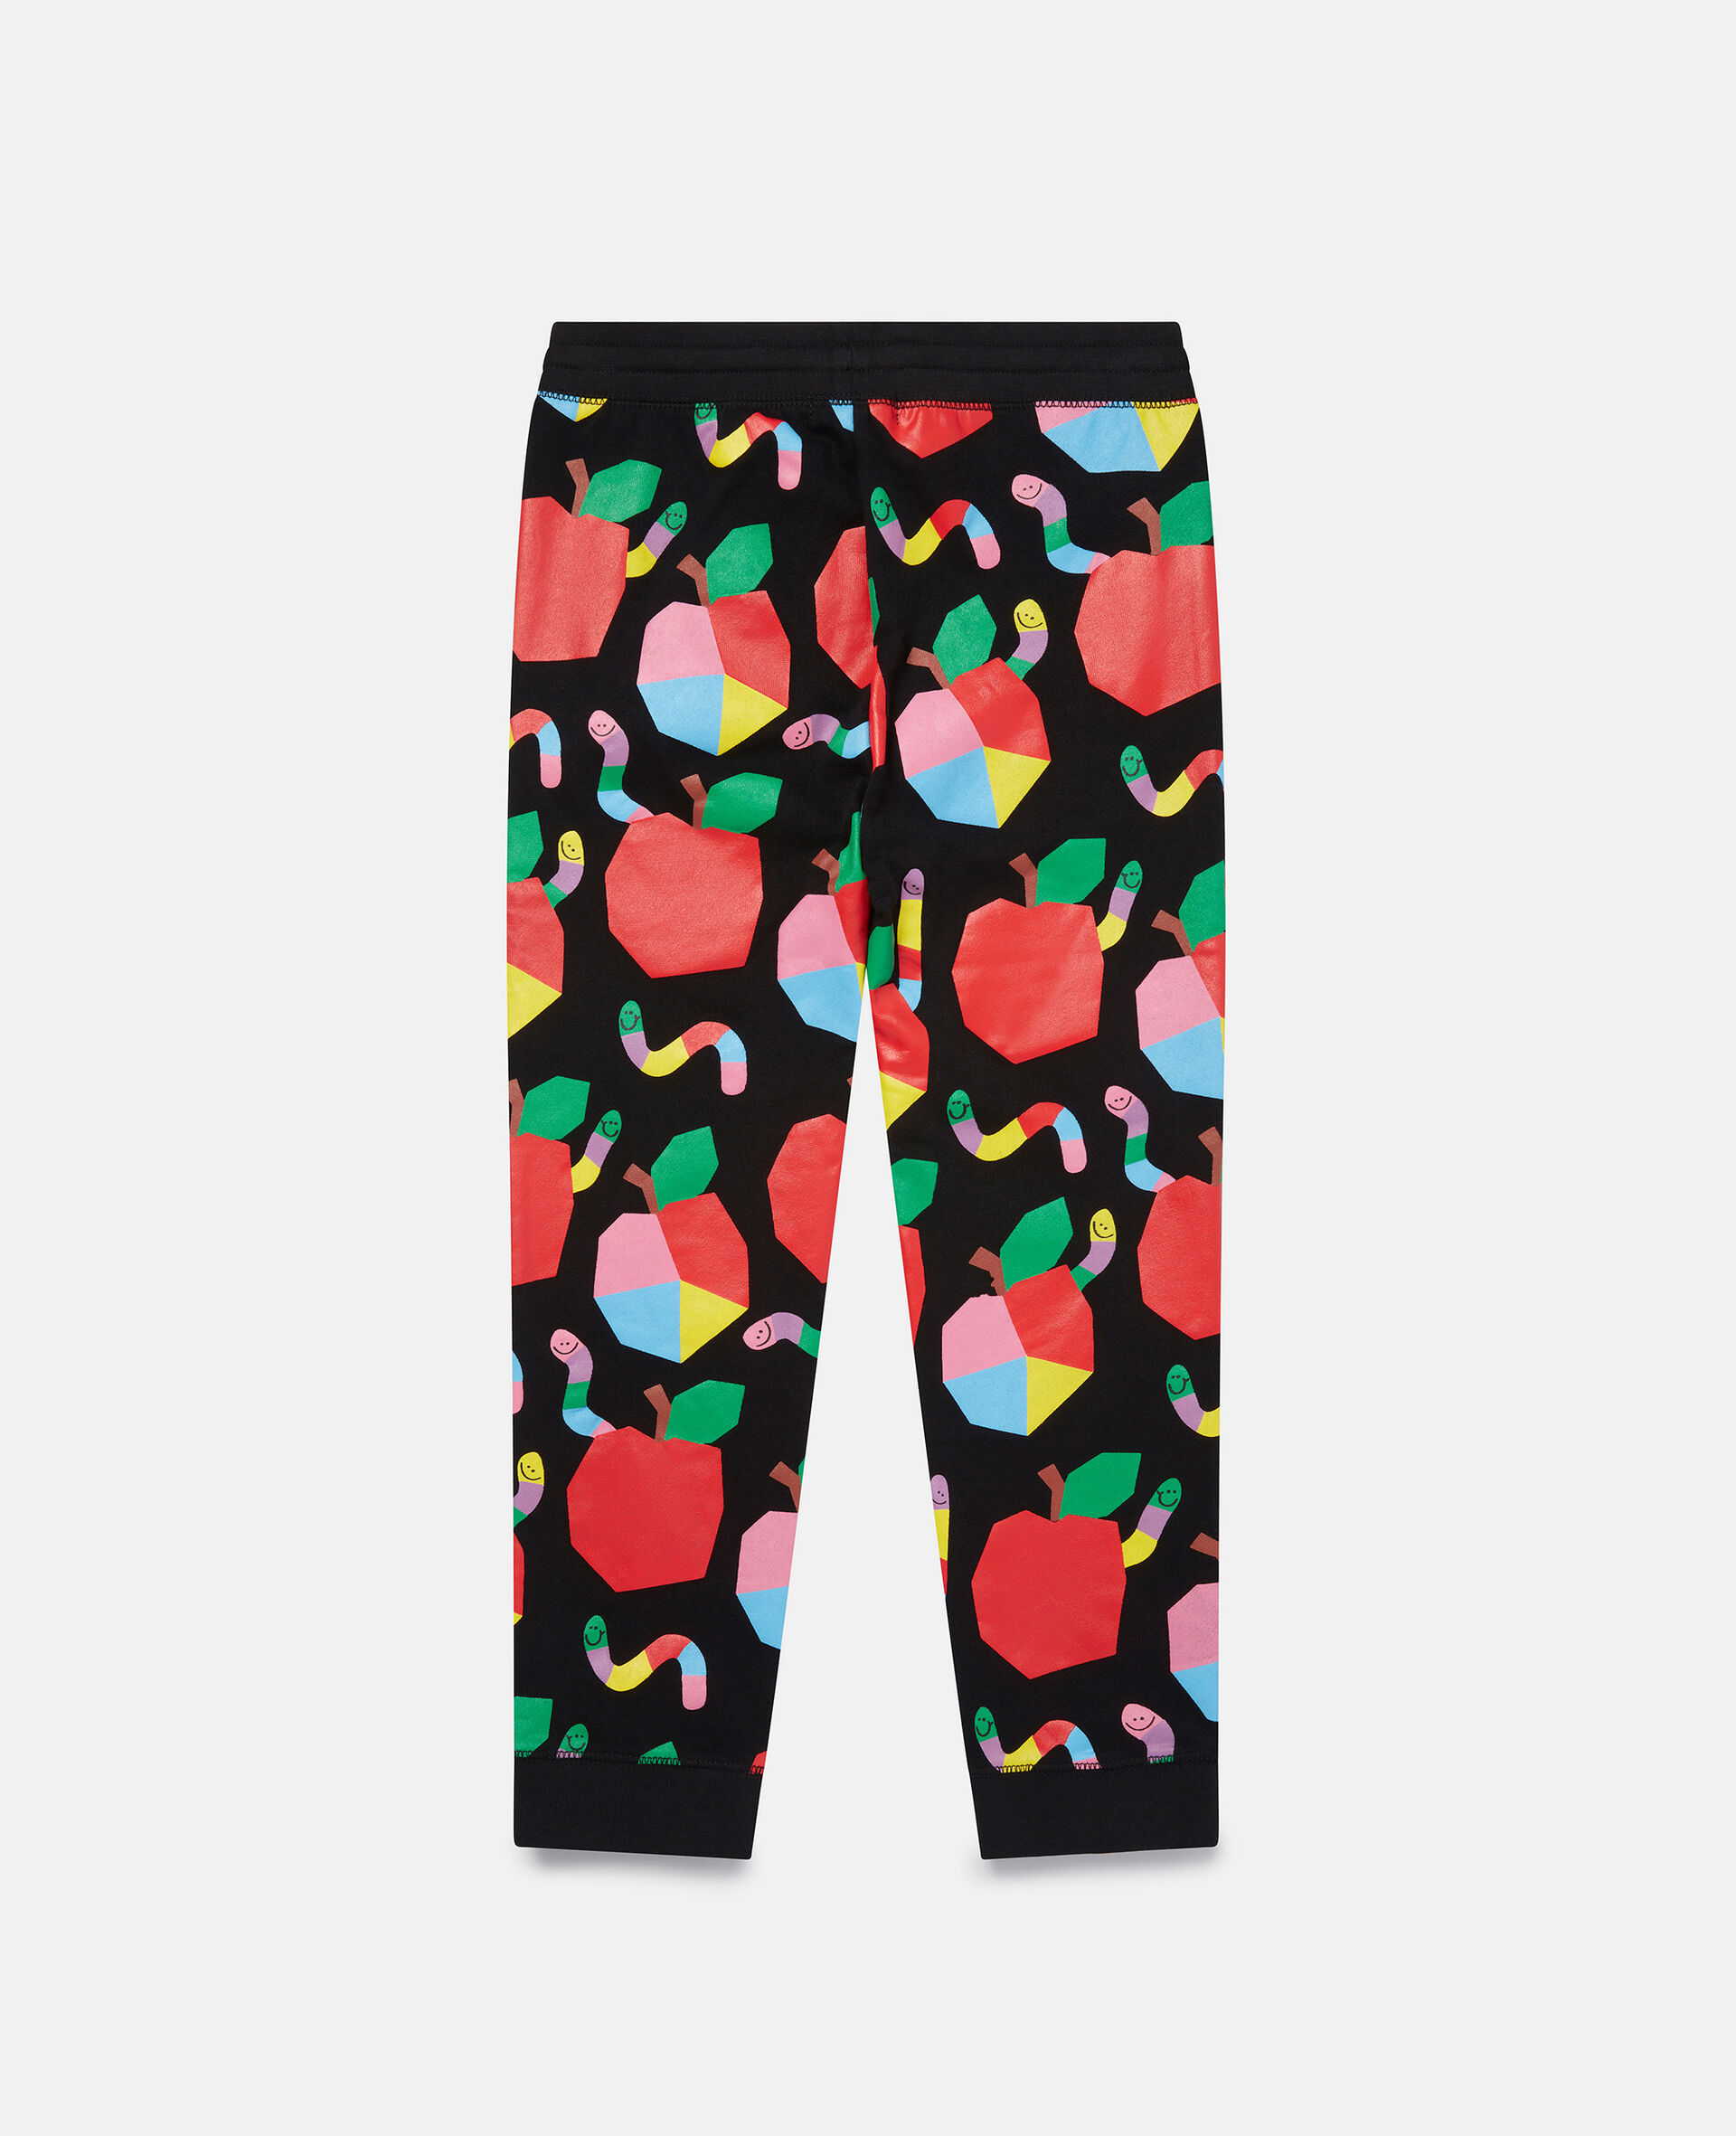 Apples & Worms Print Fleece Joggers-Black-large image number 2